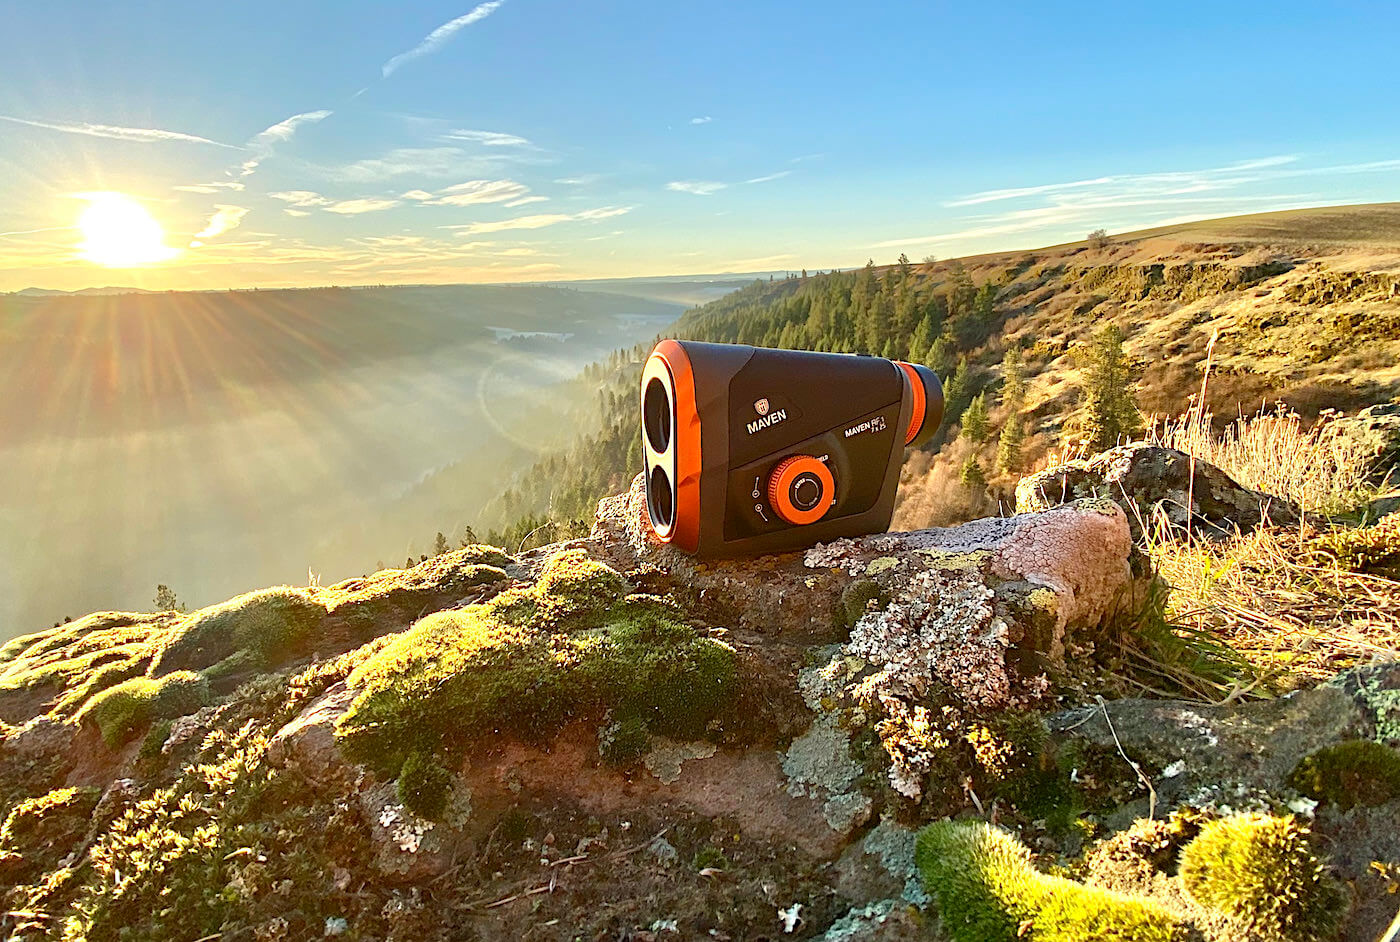 This review photo shows the Maven RF.1 Rangefinder outside on a rock in a forested landscape.